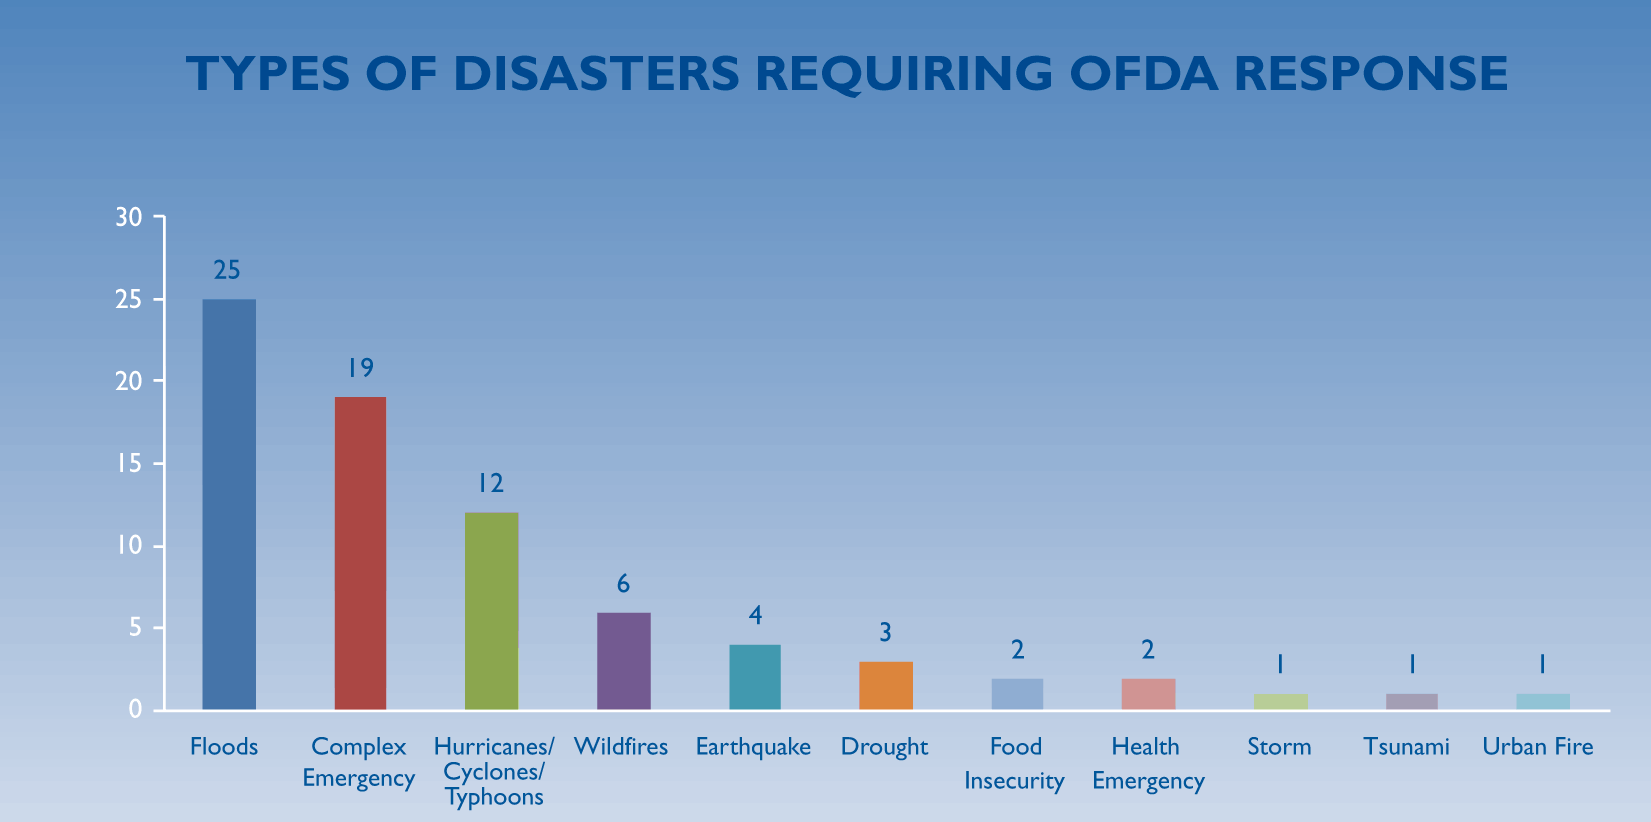 Types of Disasters Requiring OFDA Response